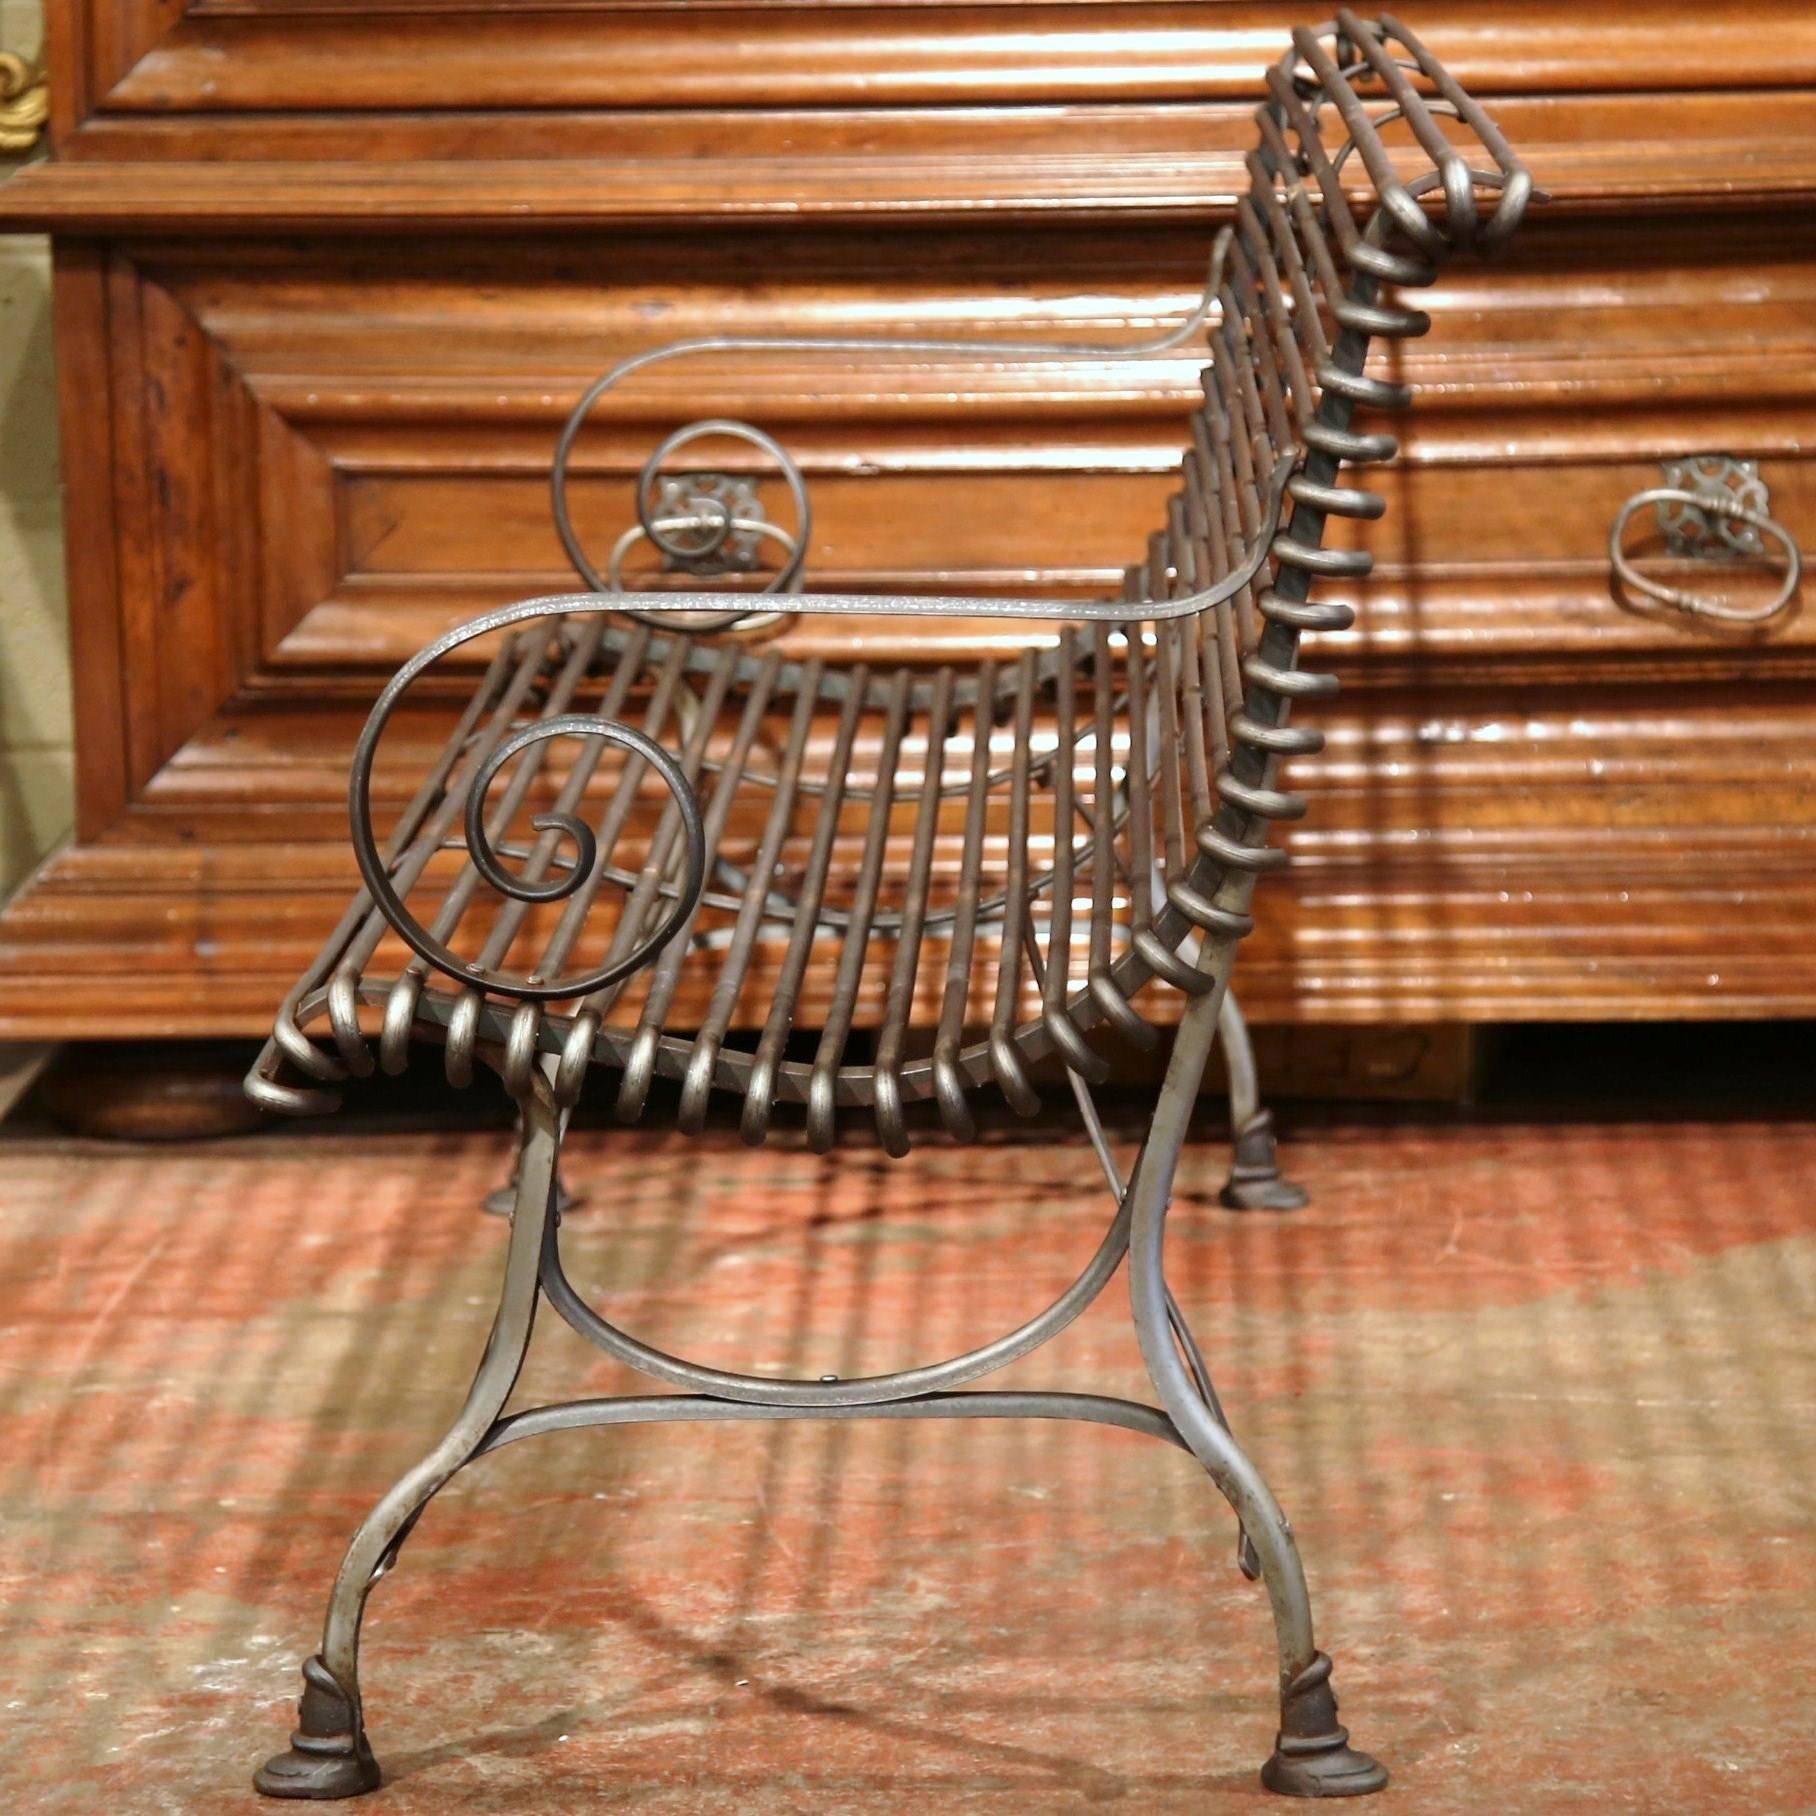 French Polished Iron Bench with Scrolled Arms and Hoof Feet Signed Sauveur Arras 2